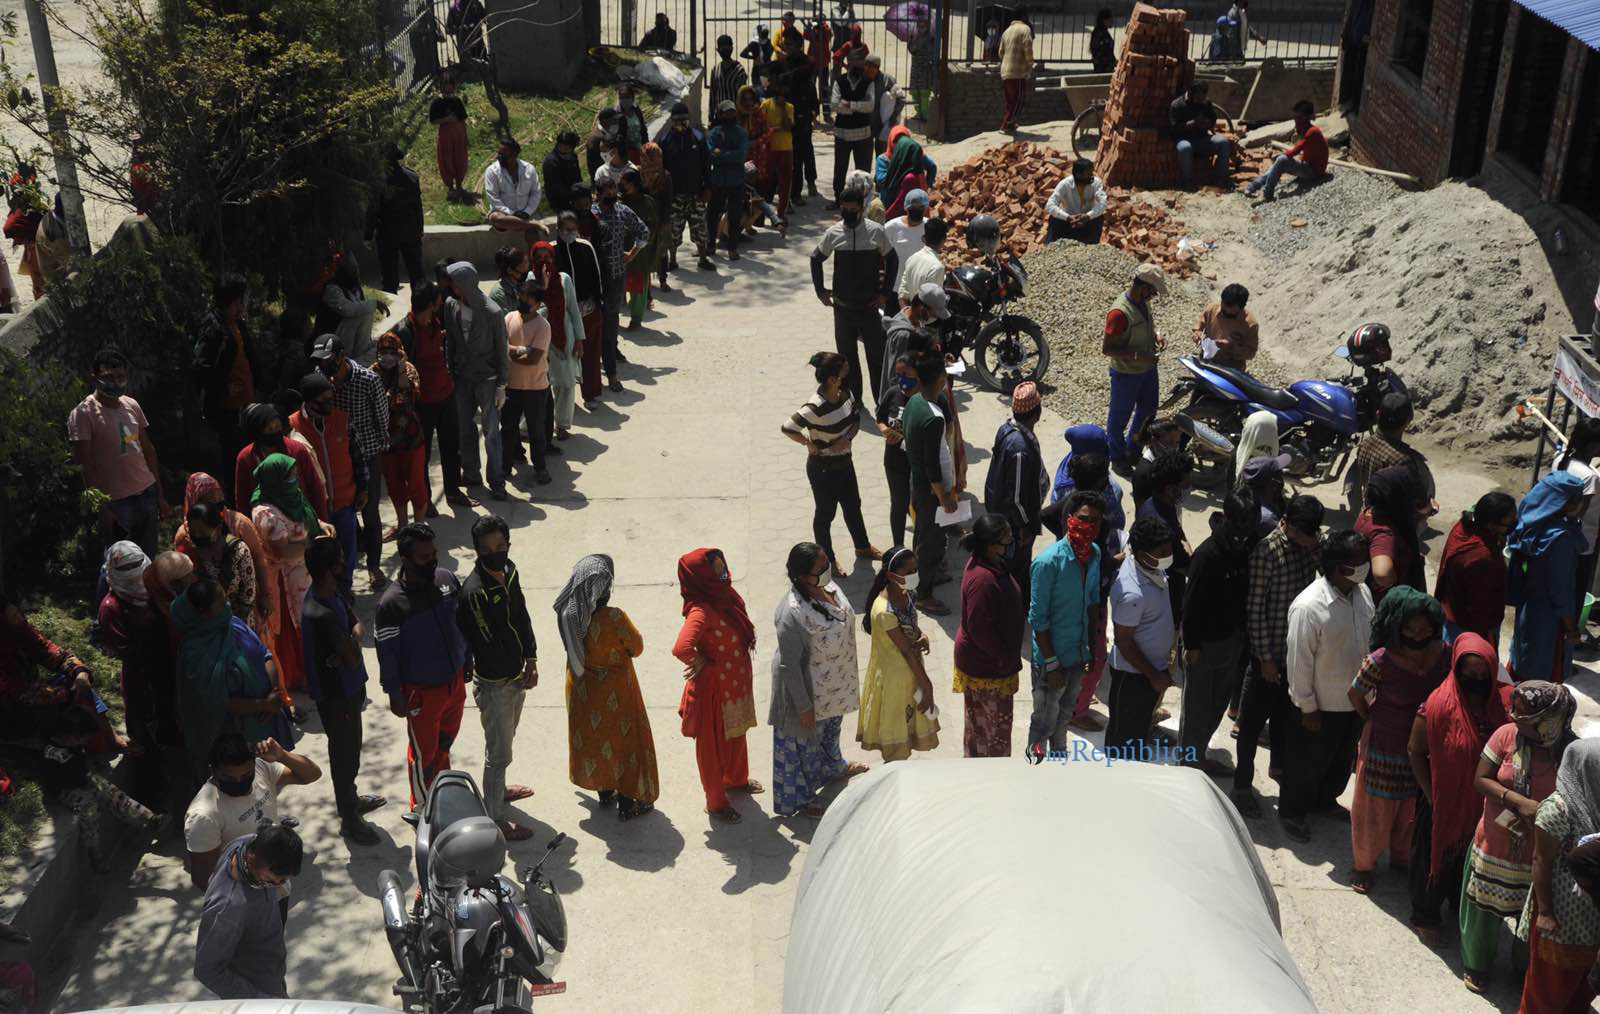 Amid lockdown order, people queuing up for govt relief without maintaining social distancing (with photos)